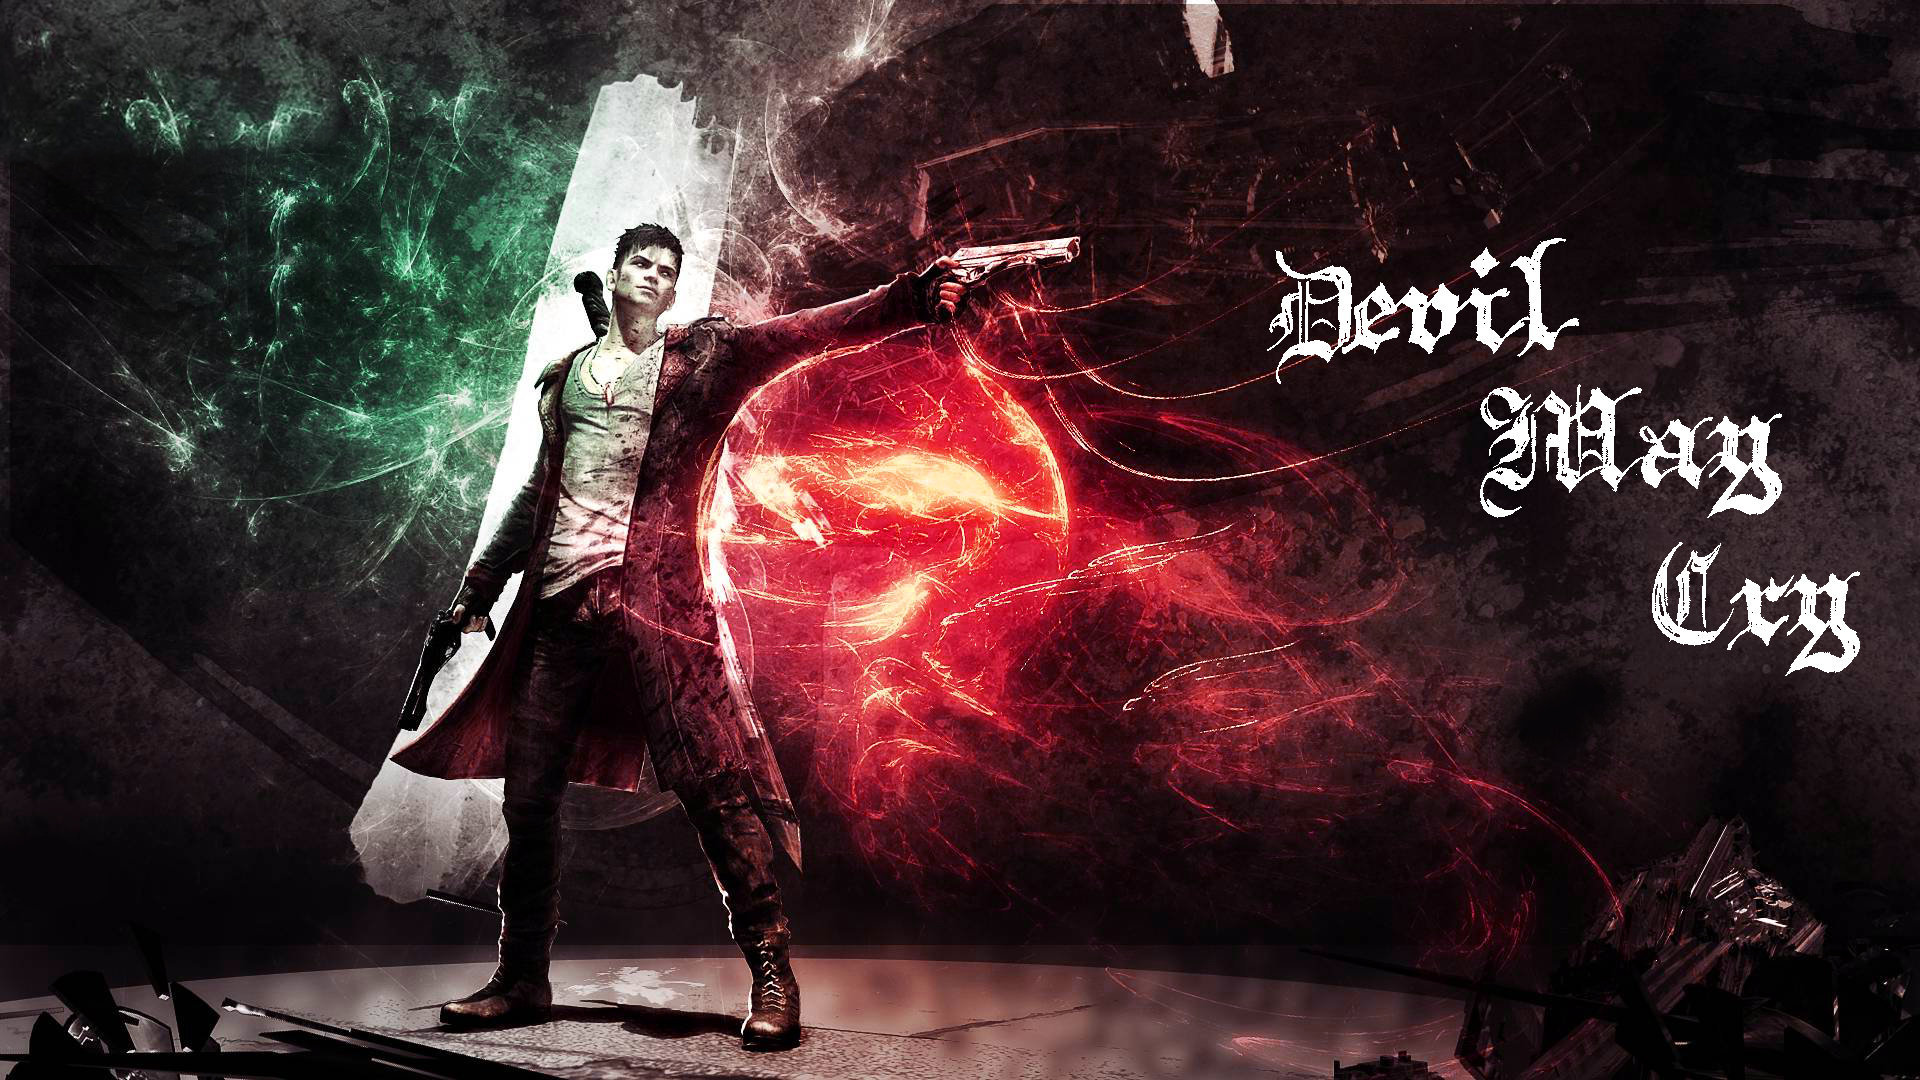 DmC Devil May Cry Cheats and Trainers